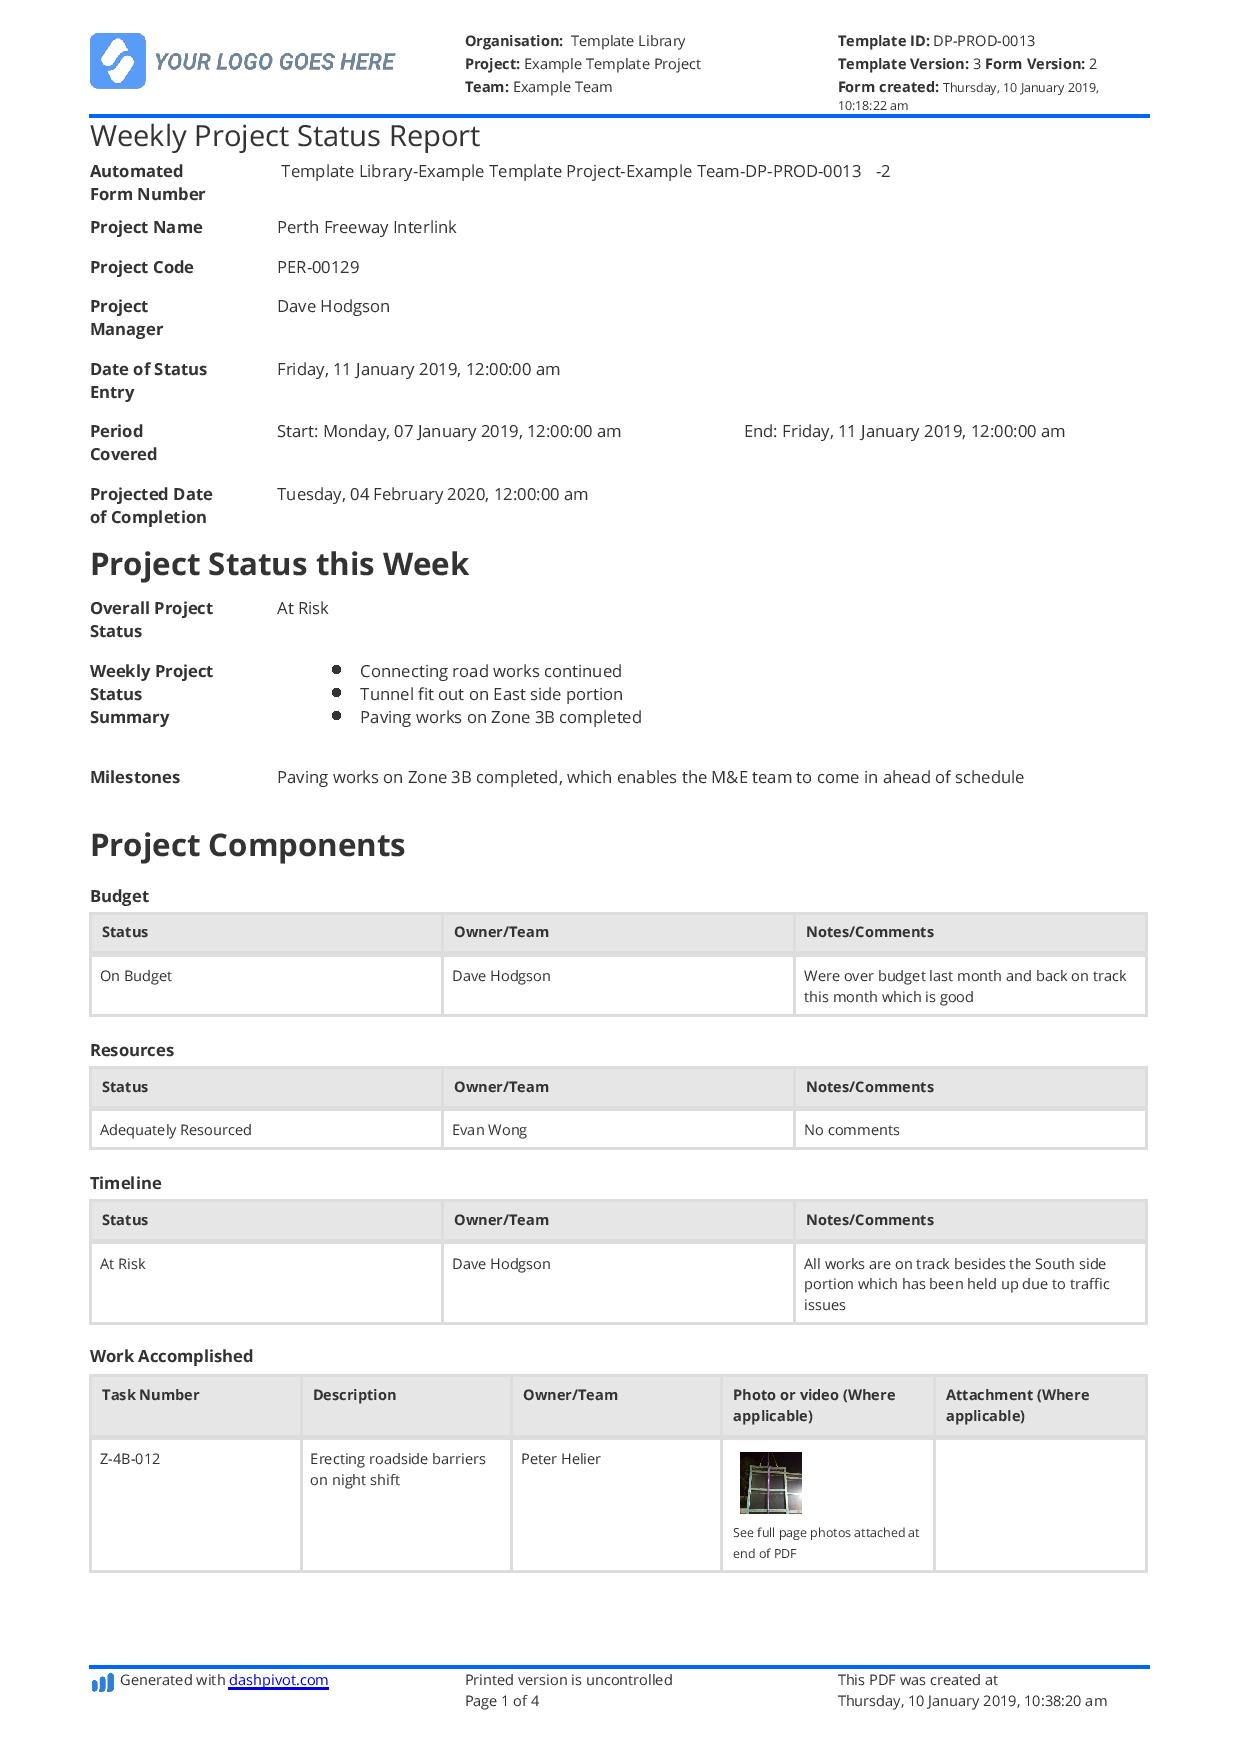 Weekly Project Status Report template - Free and customisable